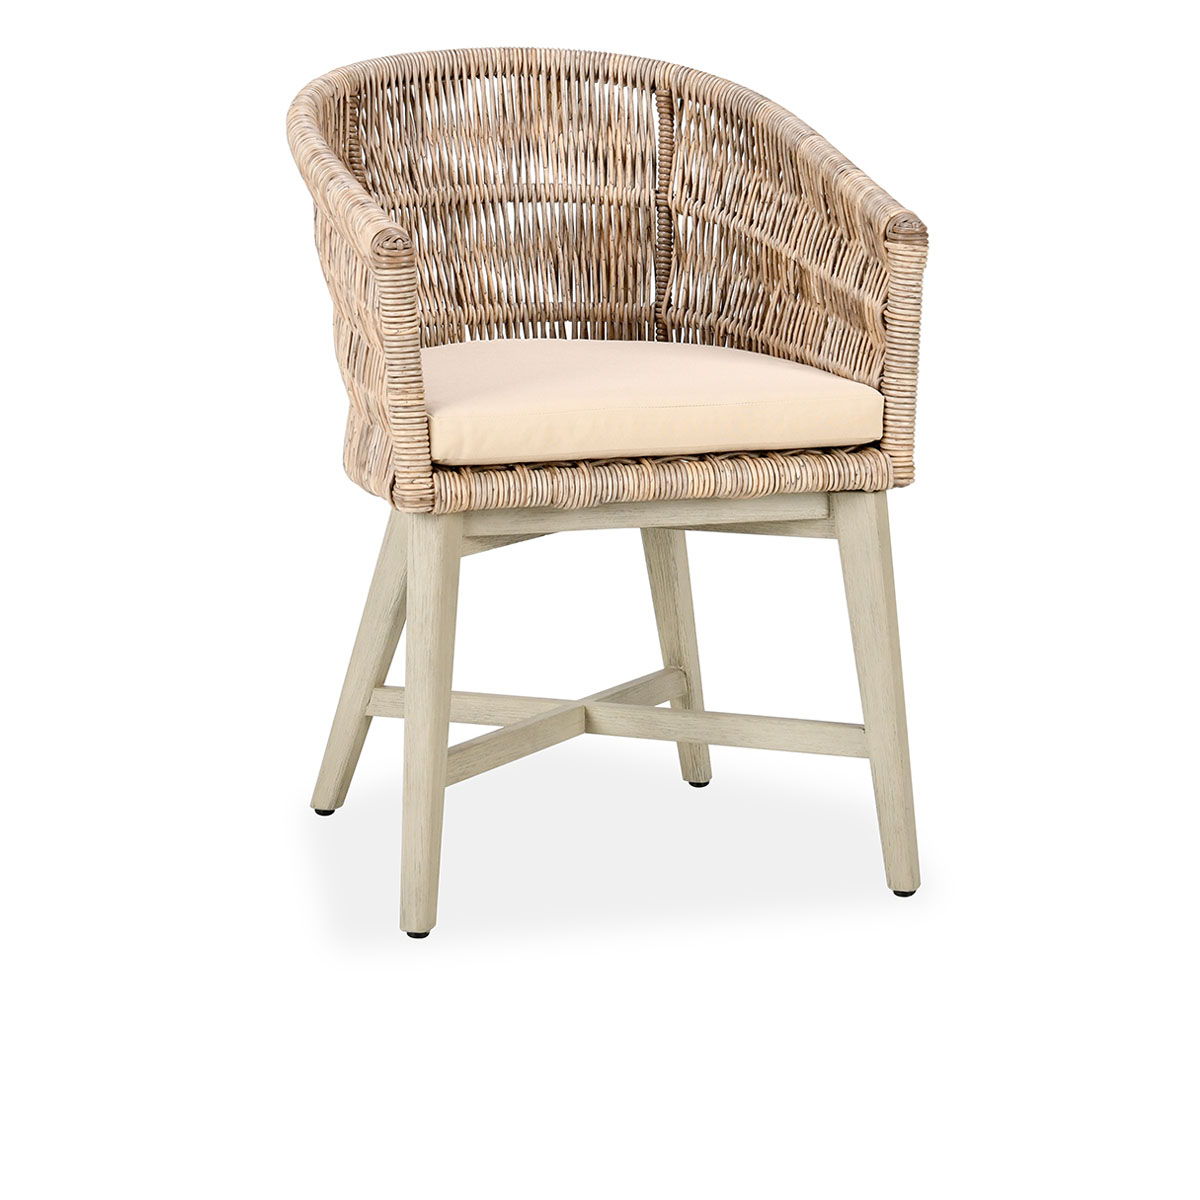 Collins - Outdoor Dining Chair - Natural/Sand